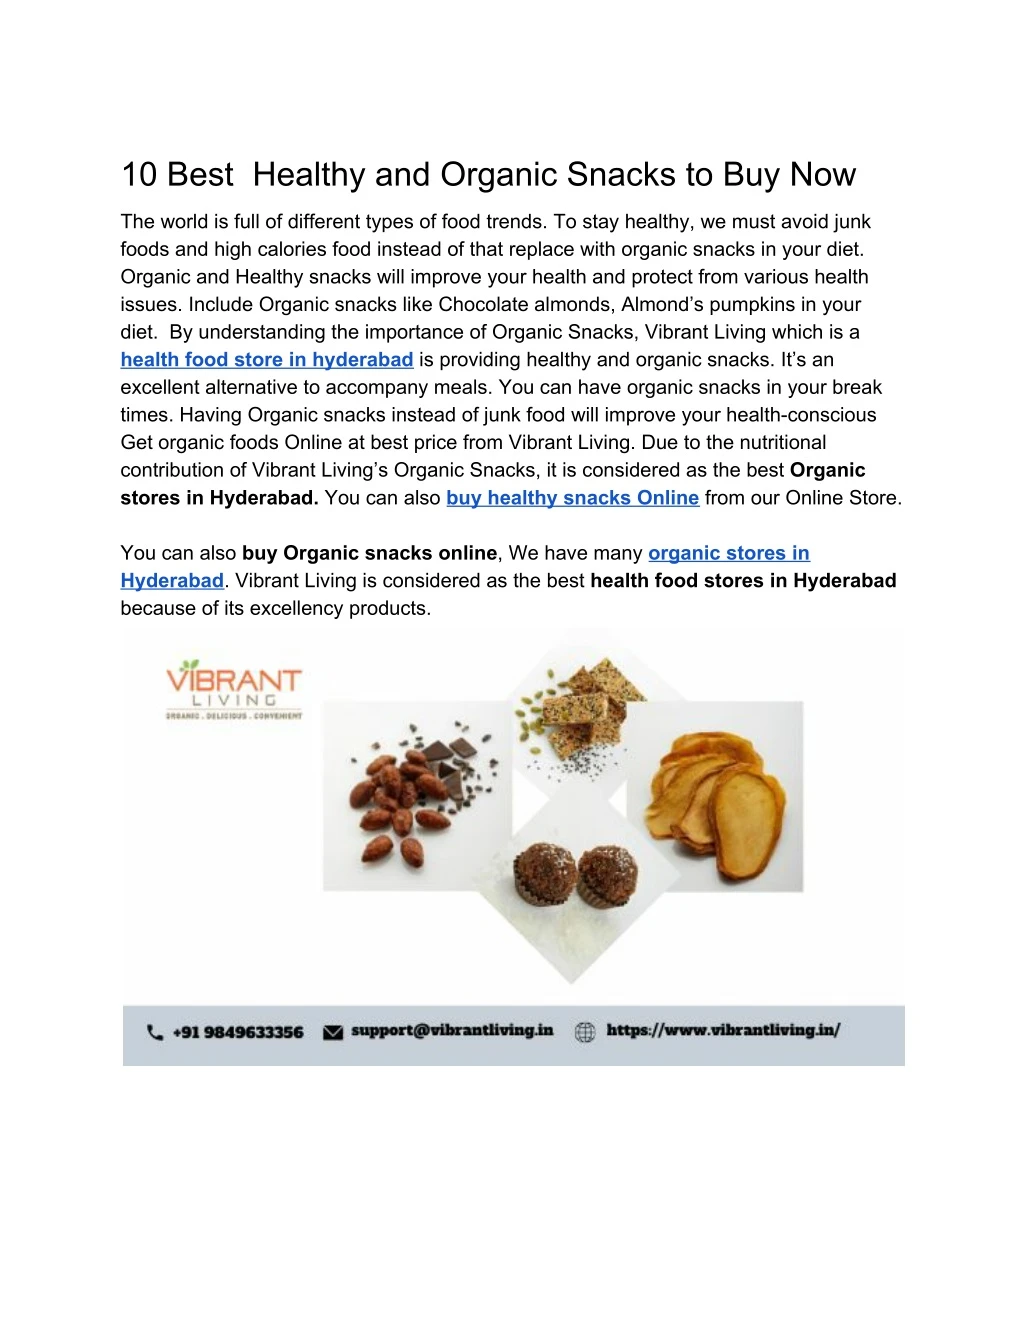 10 best healthy and organic snacks to buy now